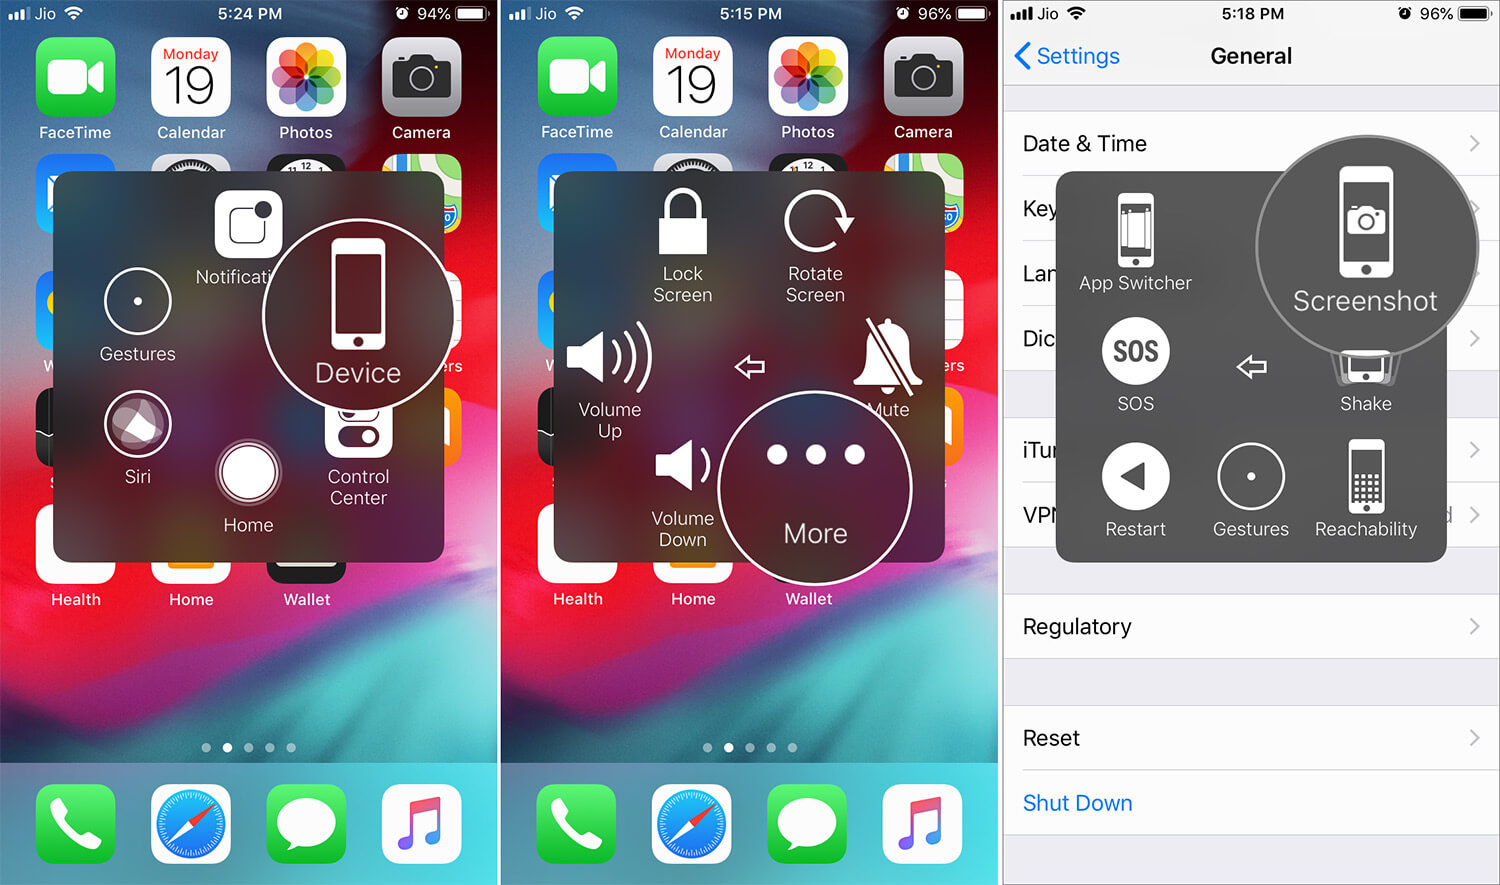 Take screenshot on iPhone or iPad without home button